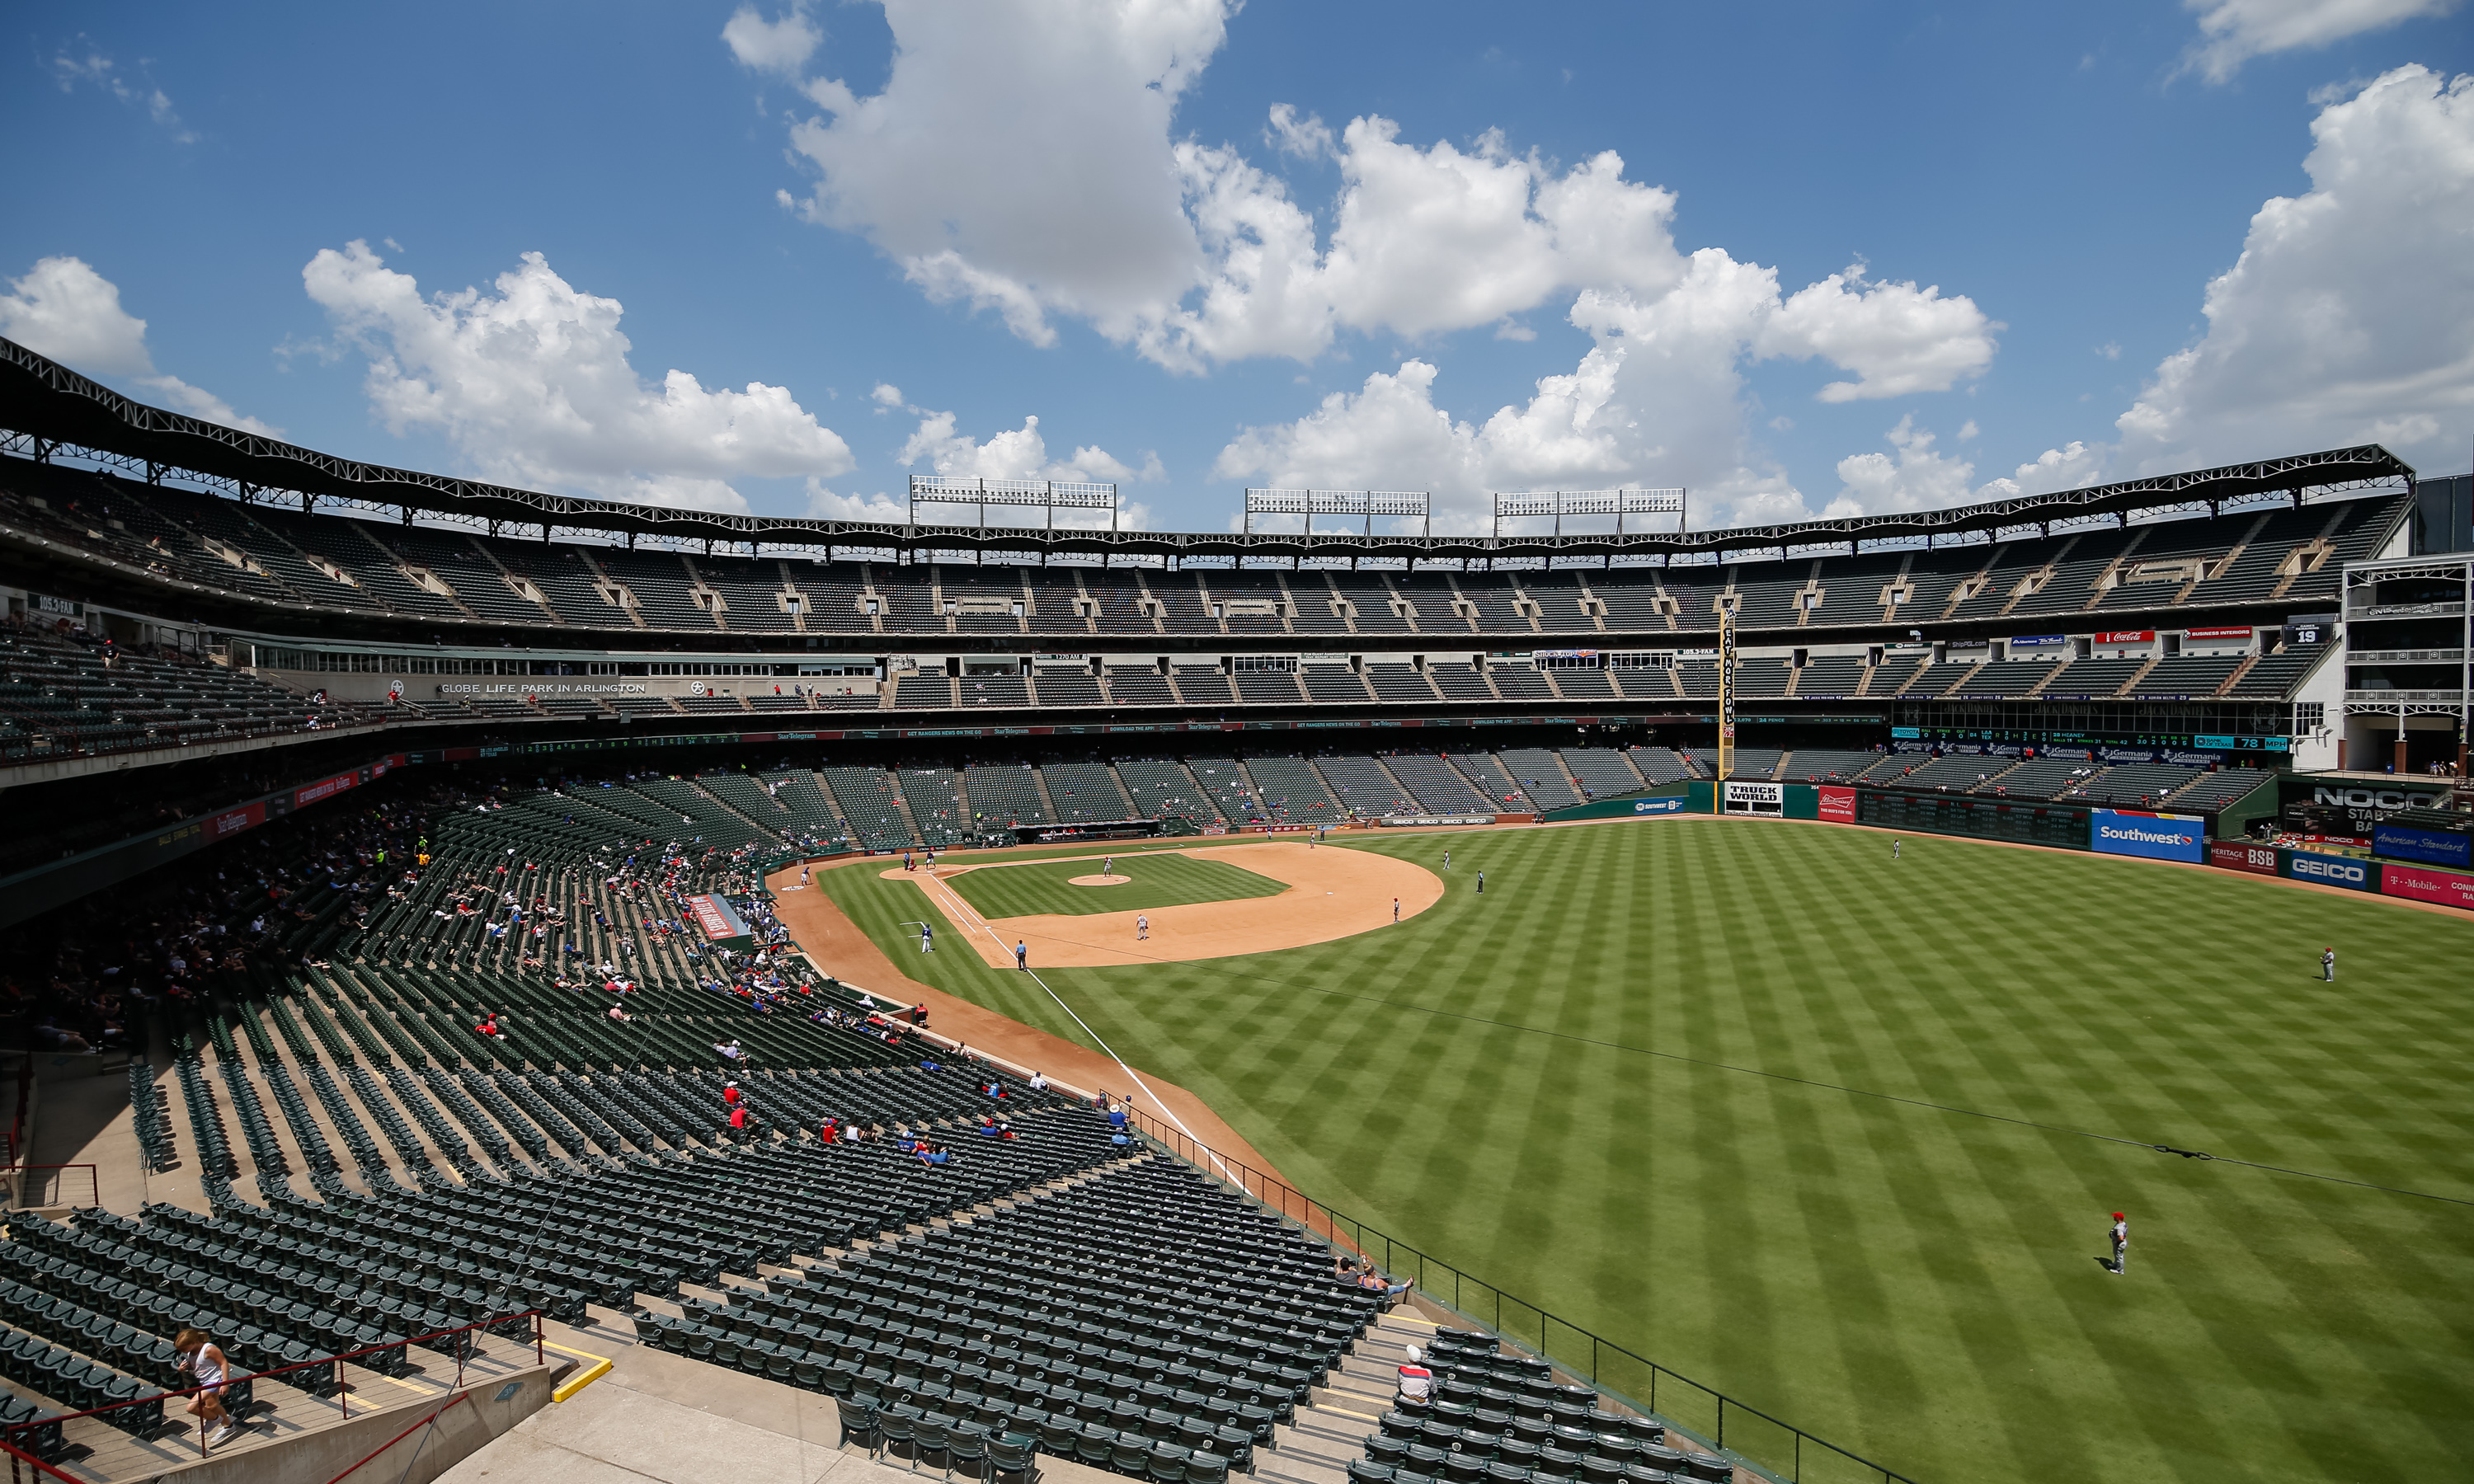 MLB: Game One-Los Angeles Angels at Texas Rangers